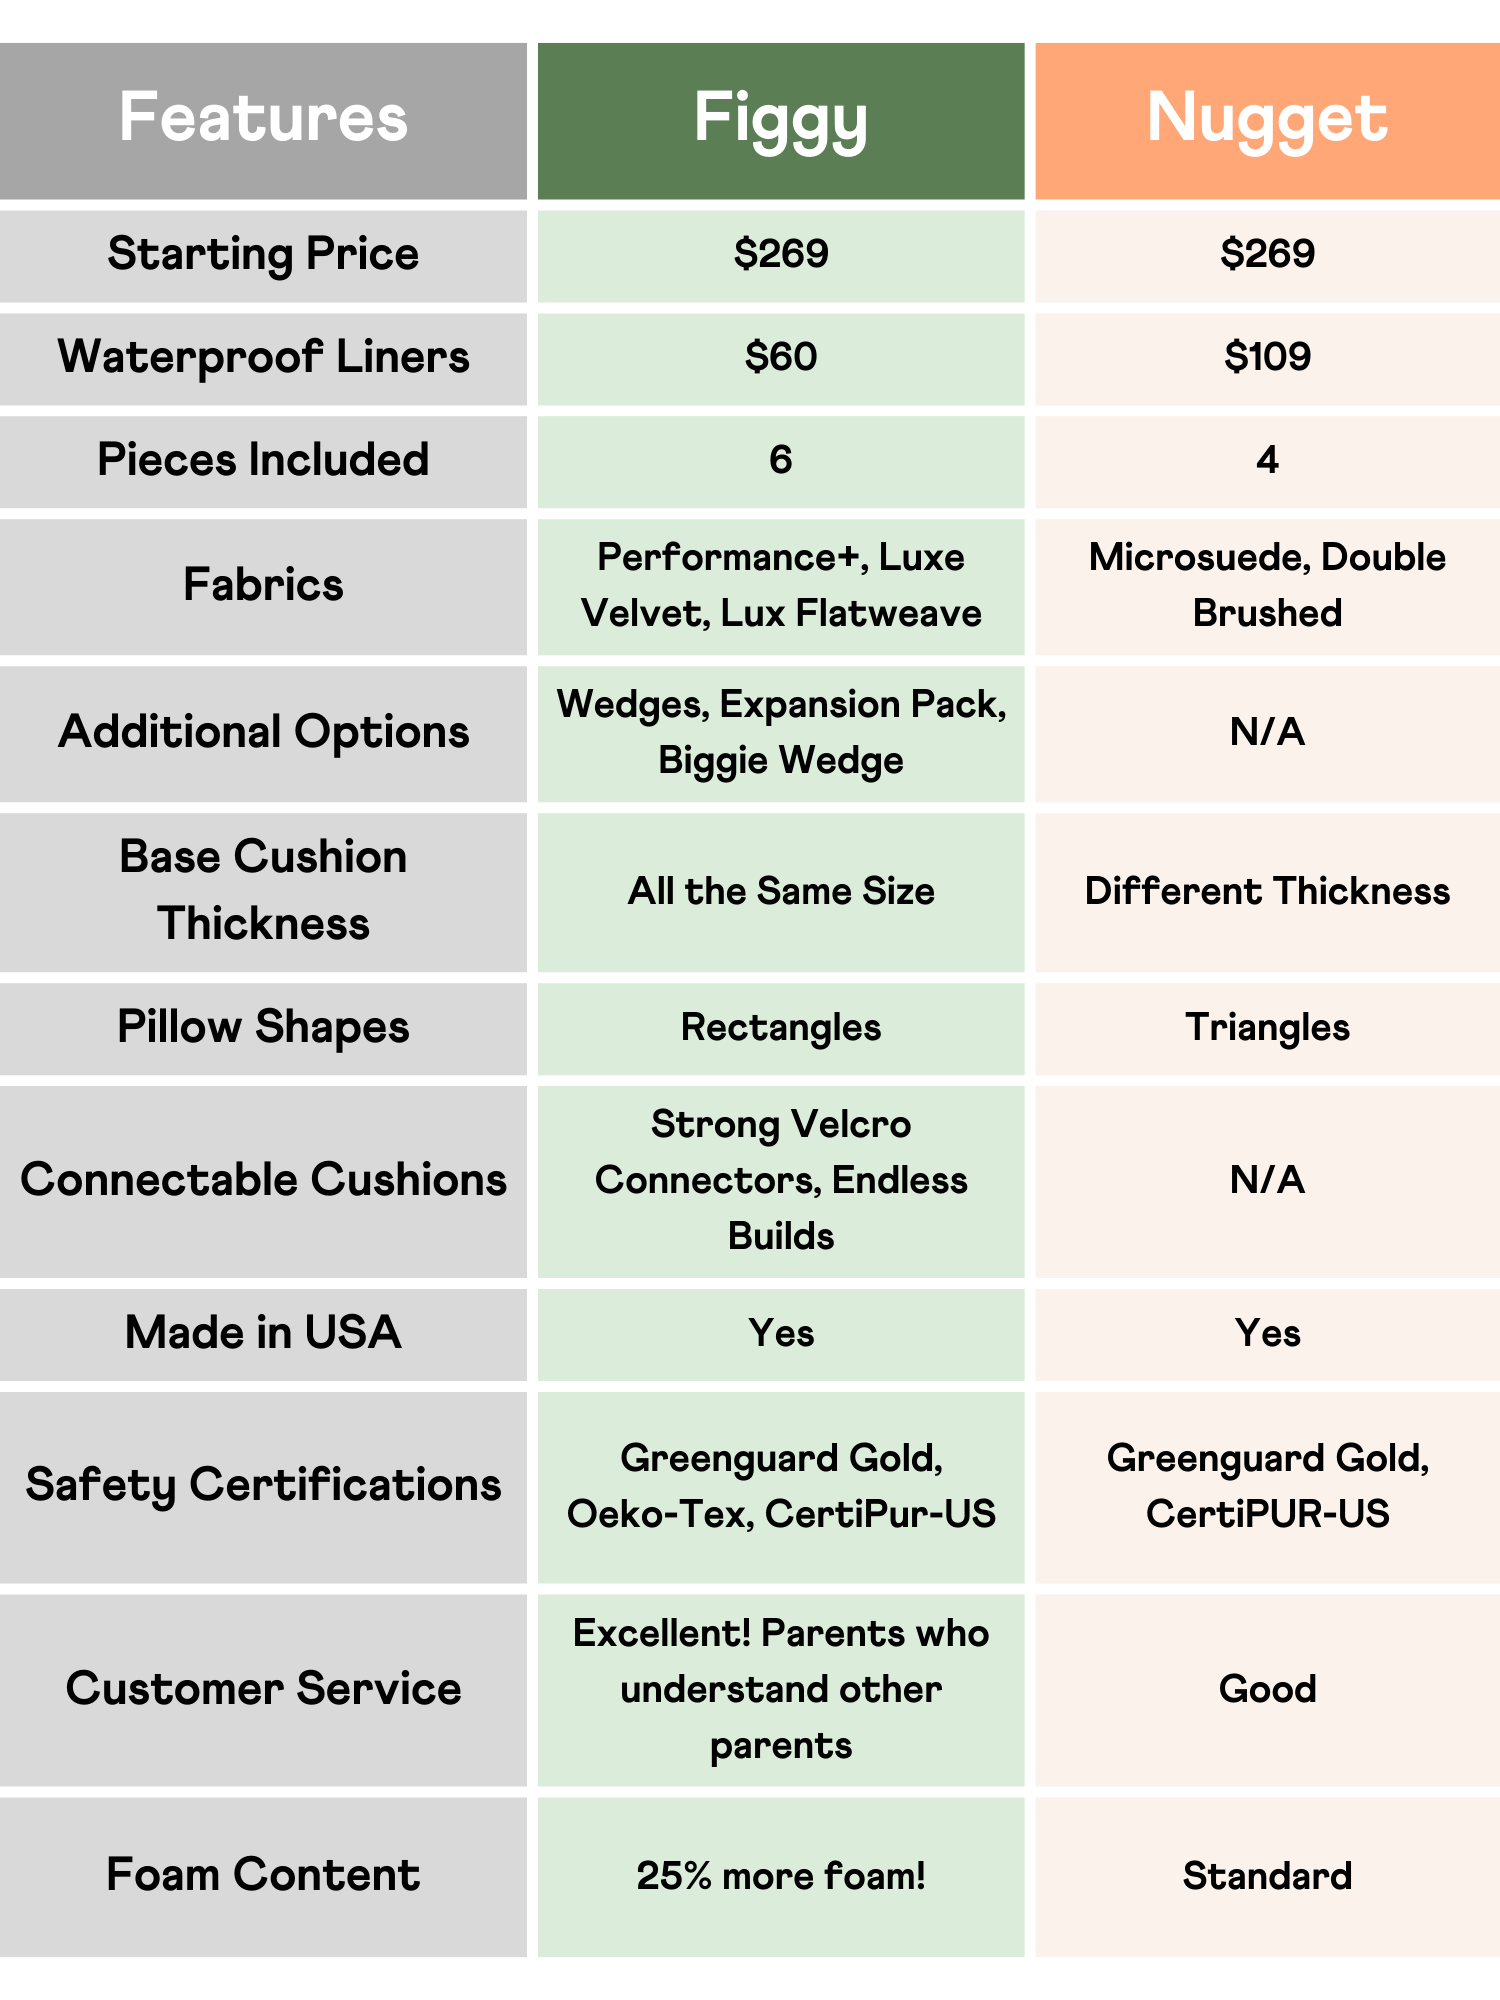 Nugget Comfort Play Couch vs. Figgy Play Couch Comparison Chart